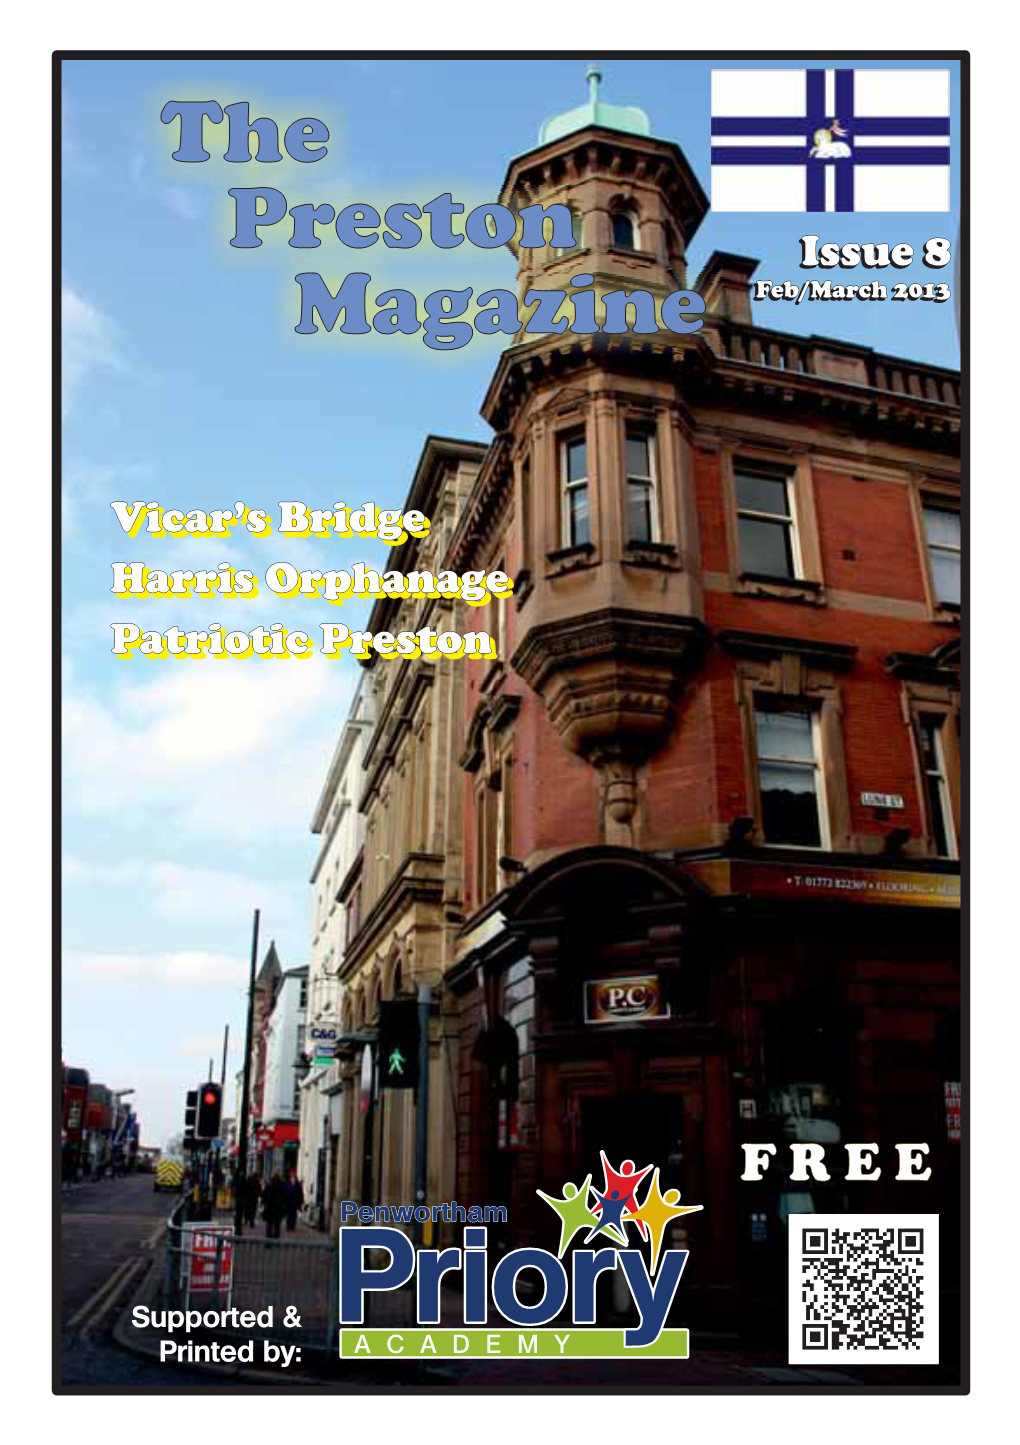 The Preston Magazine Which Is a Combined Feb/March Edition, We Hope You Will Enjoy